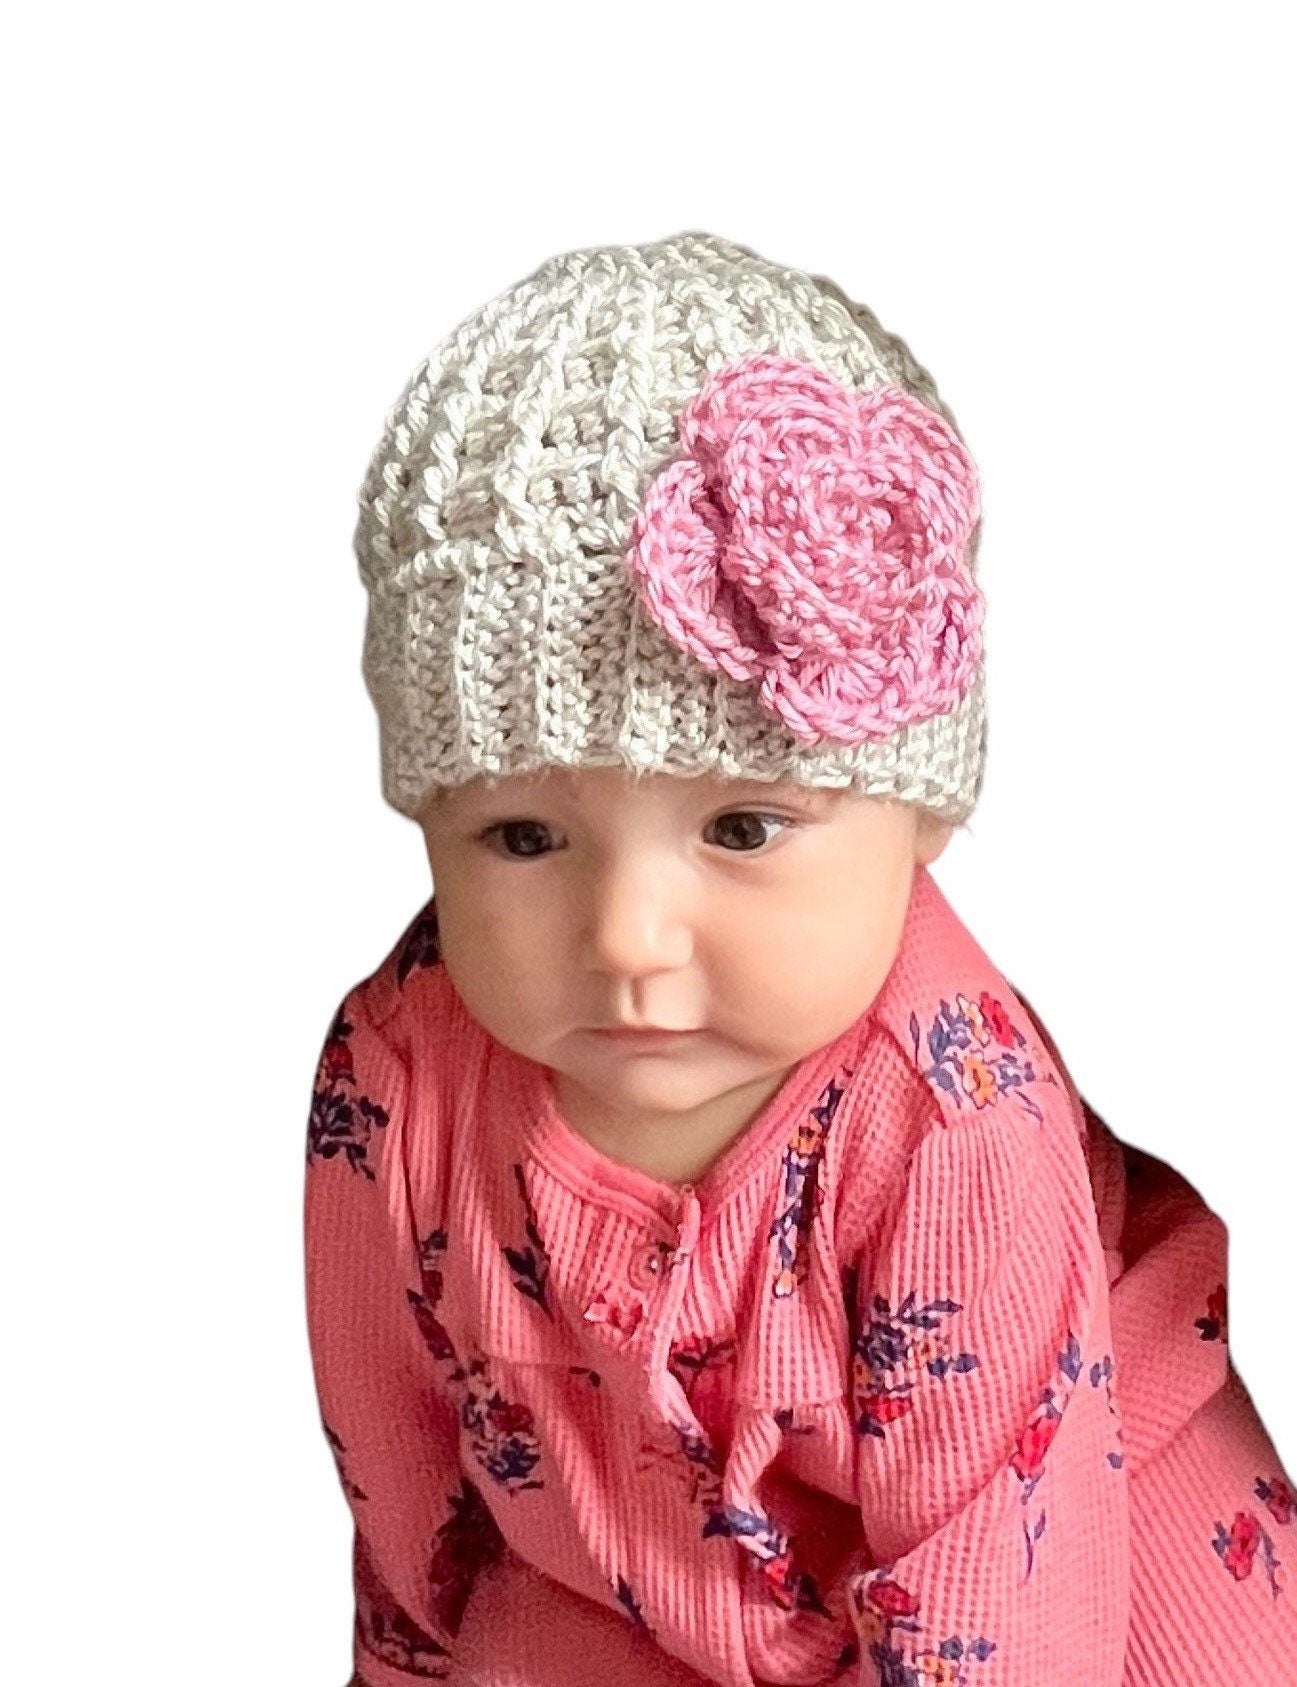 Handmade crochet hat for a baby girl, silver/light gray hat with pink crochet flower, hat for toddler girl, different sizes available - Lilly Grace Sparkle Boutique